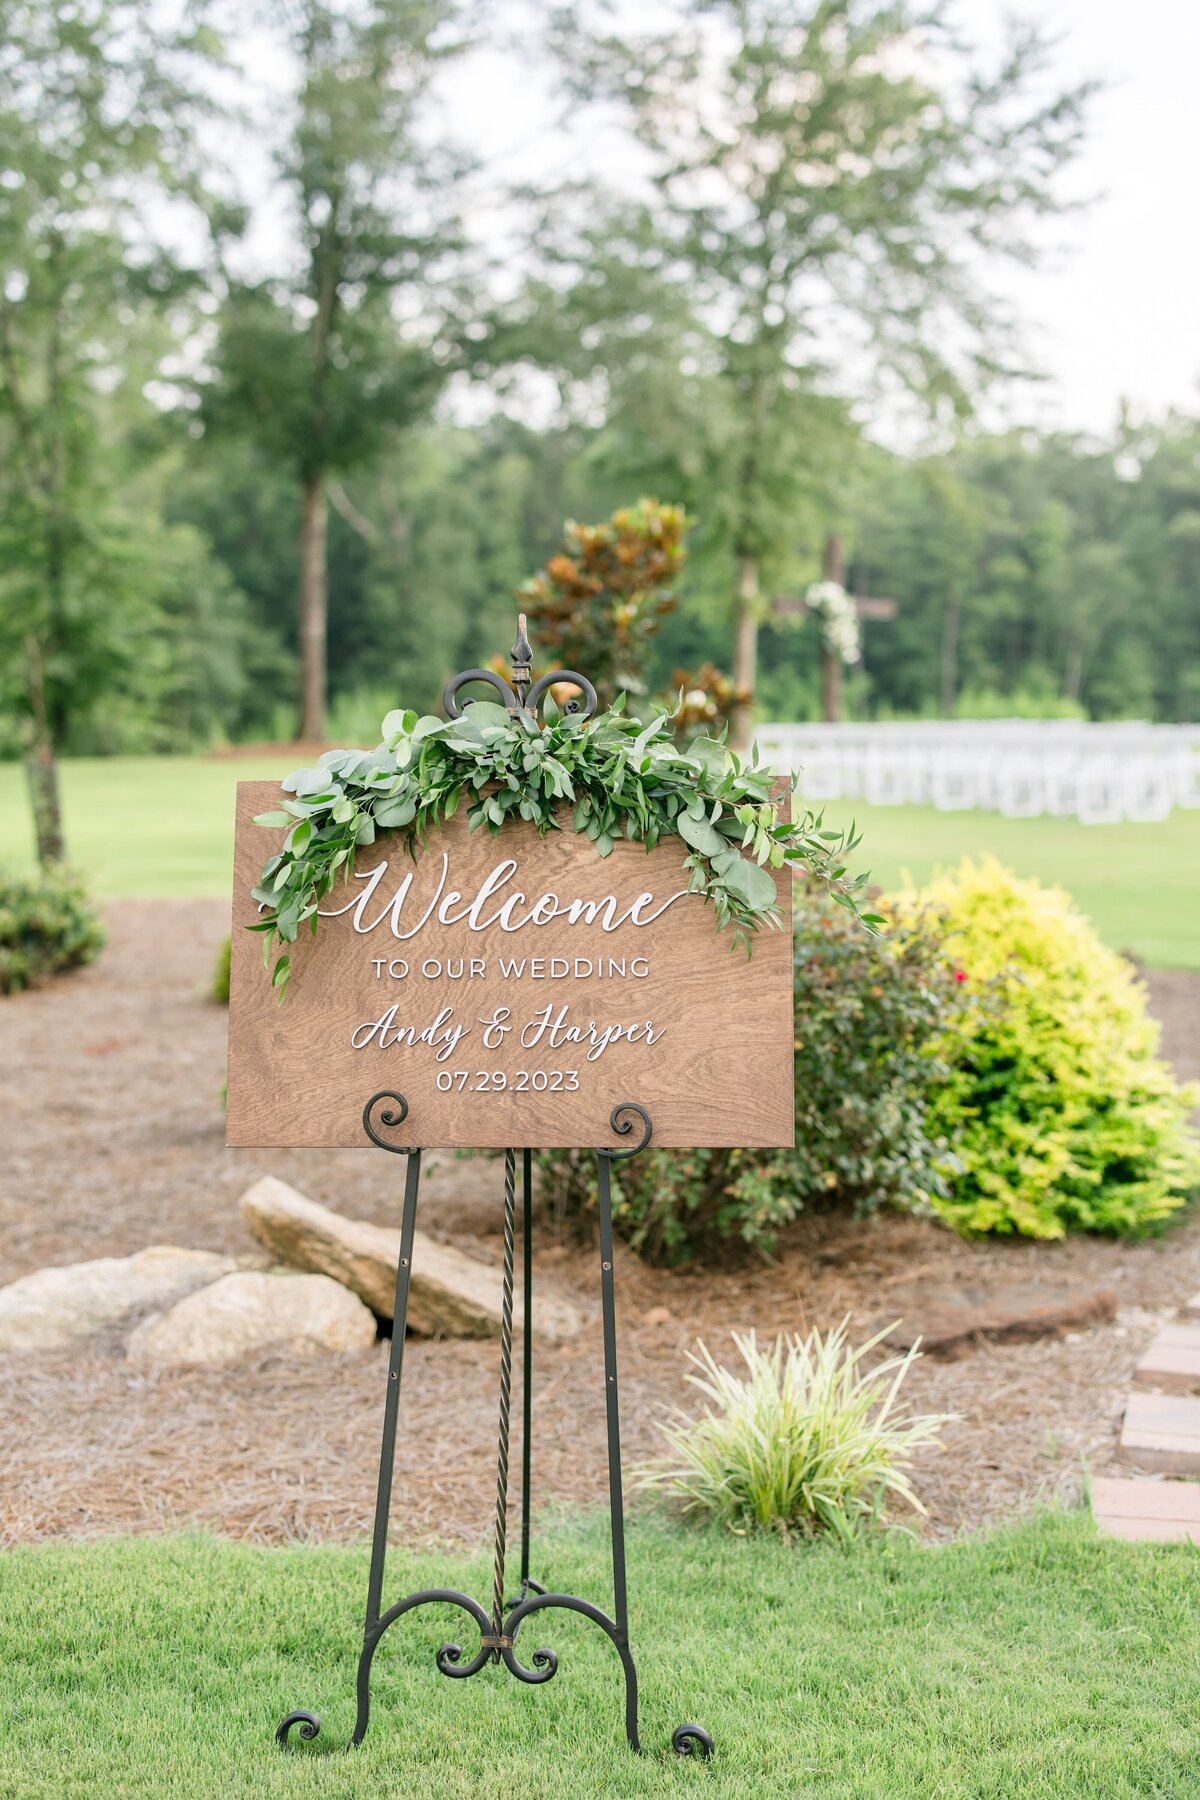 katie_and_alec_wedding_photography_wedding_videography_birmingham_alabama_husband_and_wife_team_photo_video_weddings_engagement_engagements_light_airy_focused_on_marriage__legacy_at_serenity_farms_wedding_23